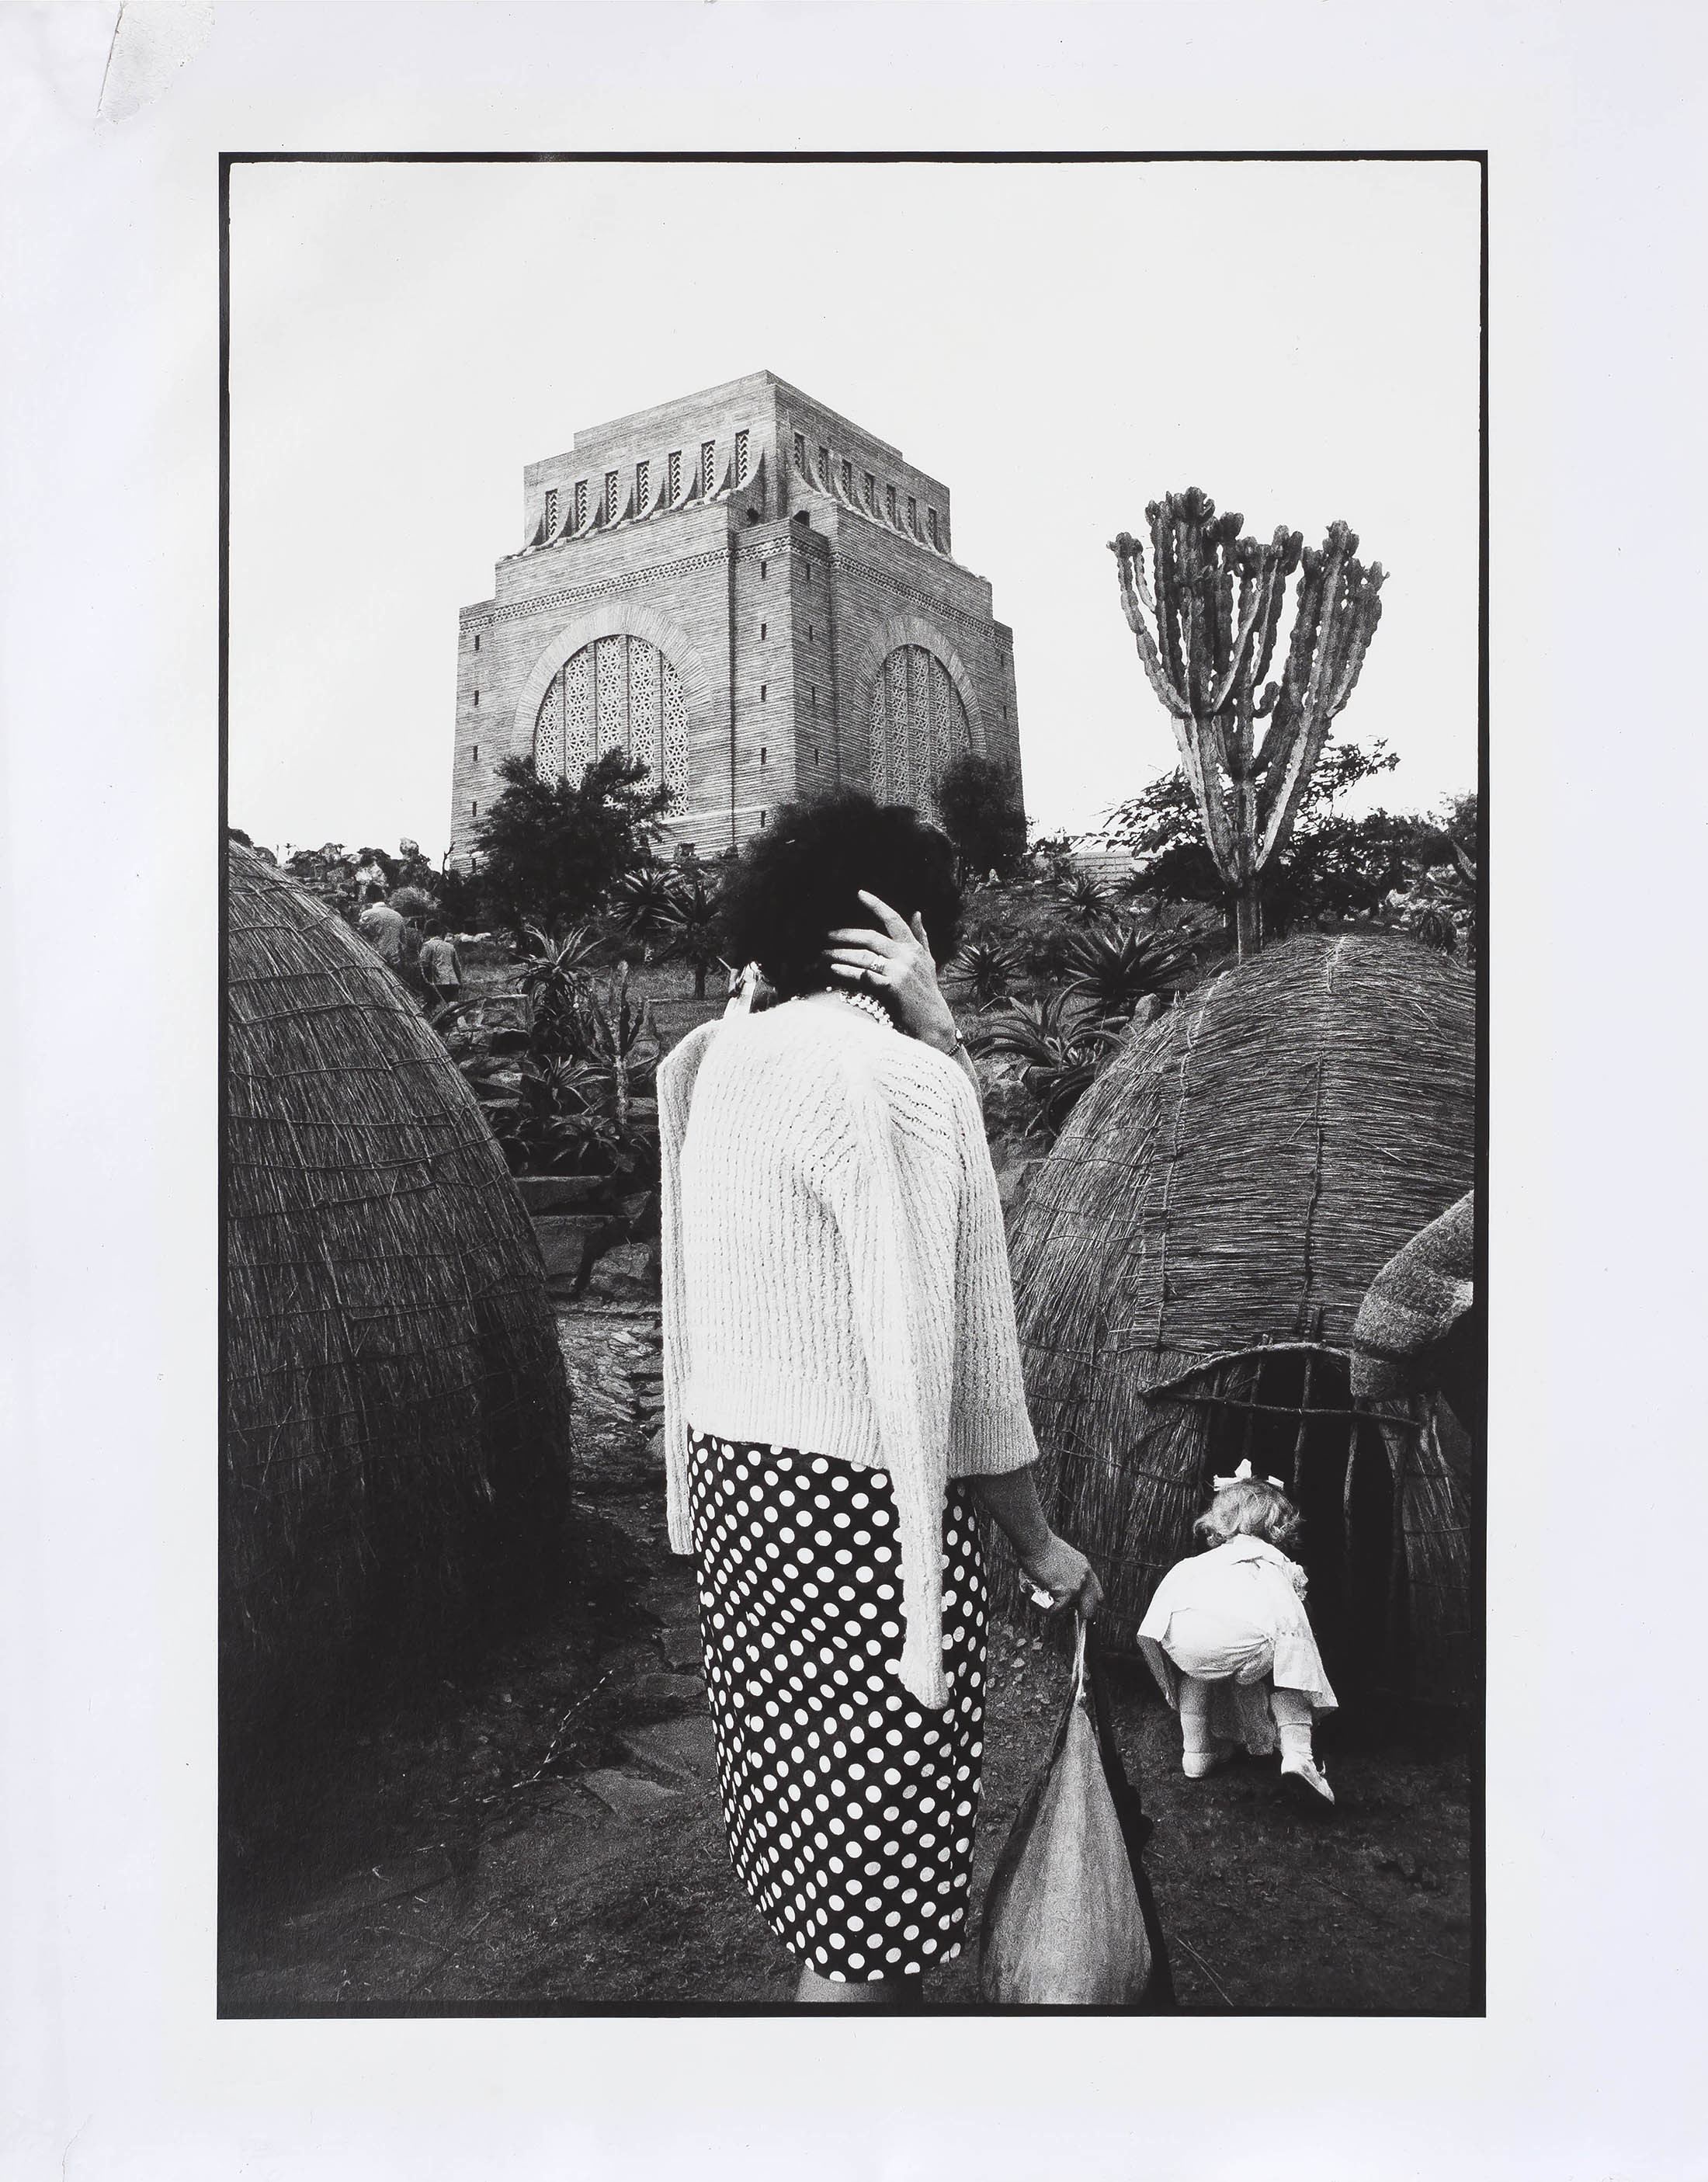 David Goldblatt; At the Voortrekker Monument, on the Day of the Covenant